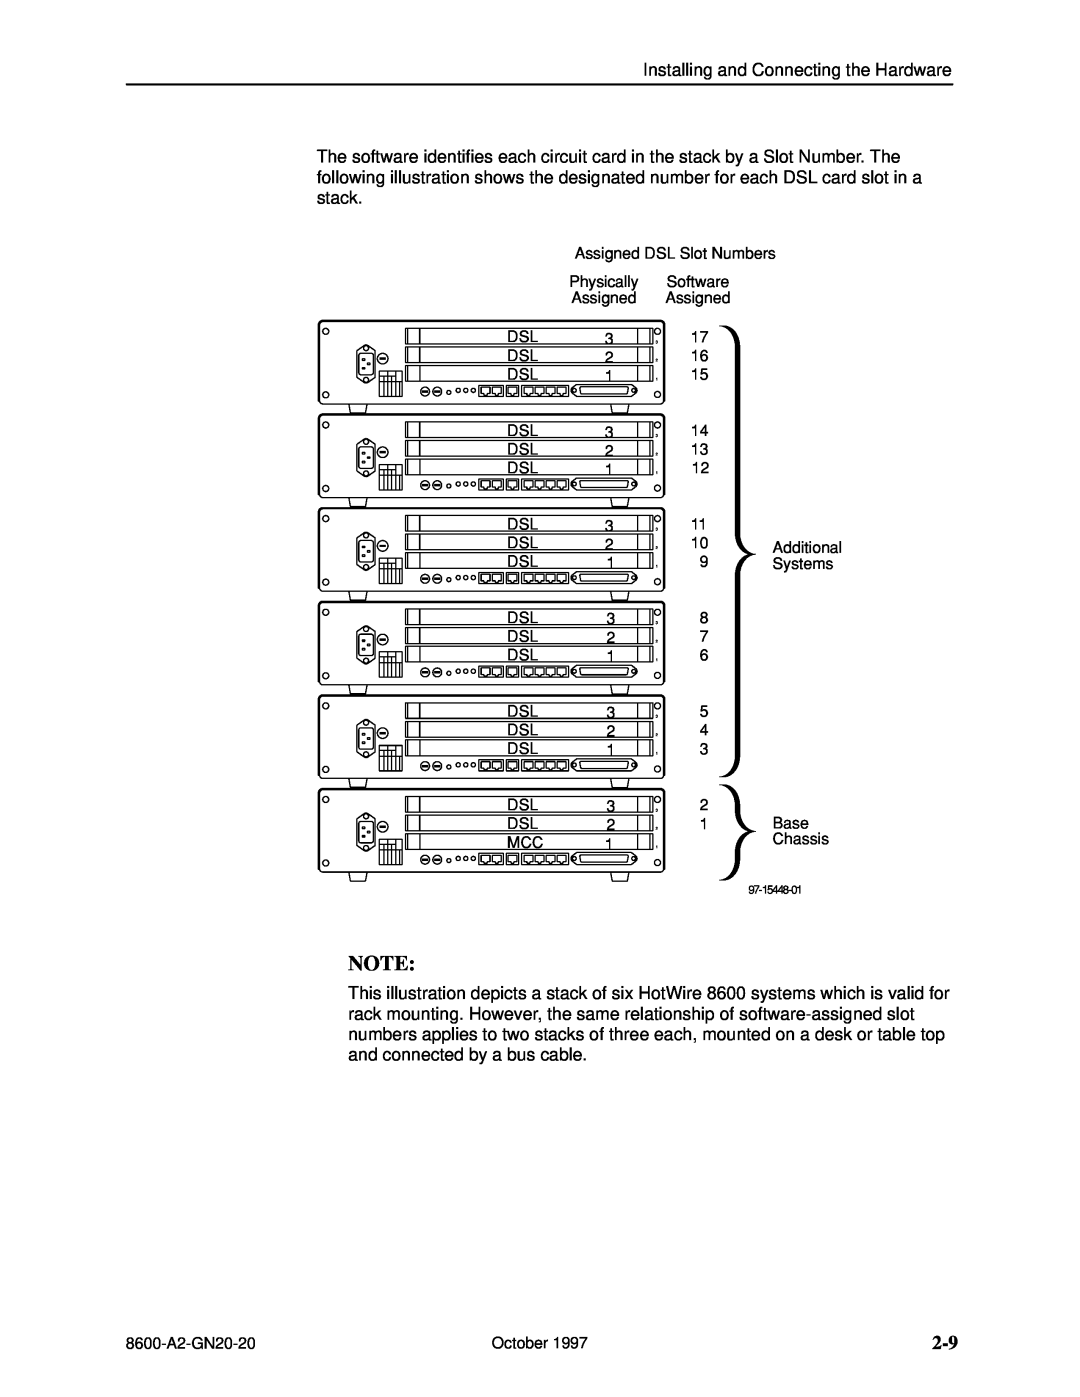 Nortel Networks 8600 Assigned DSL Slot Numbers Physically Software Assigned Assigned, Additional 9 Systems, Dsl Dsl Mcc 